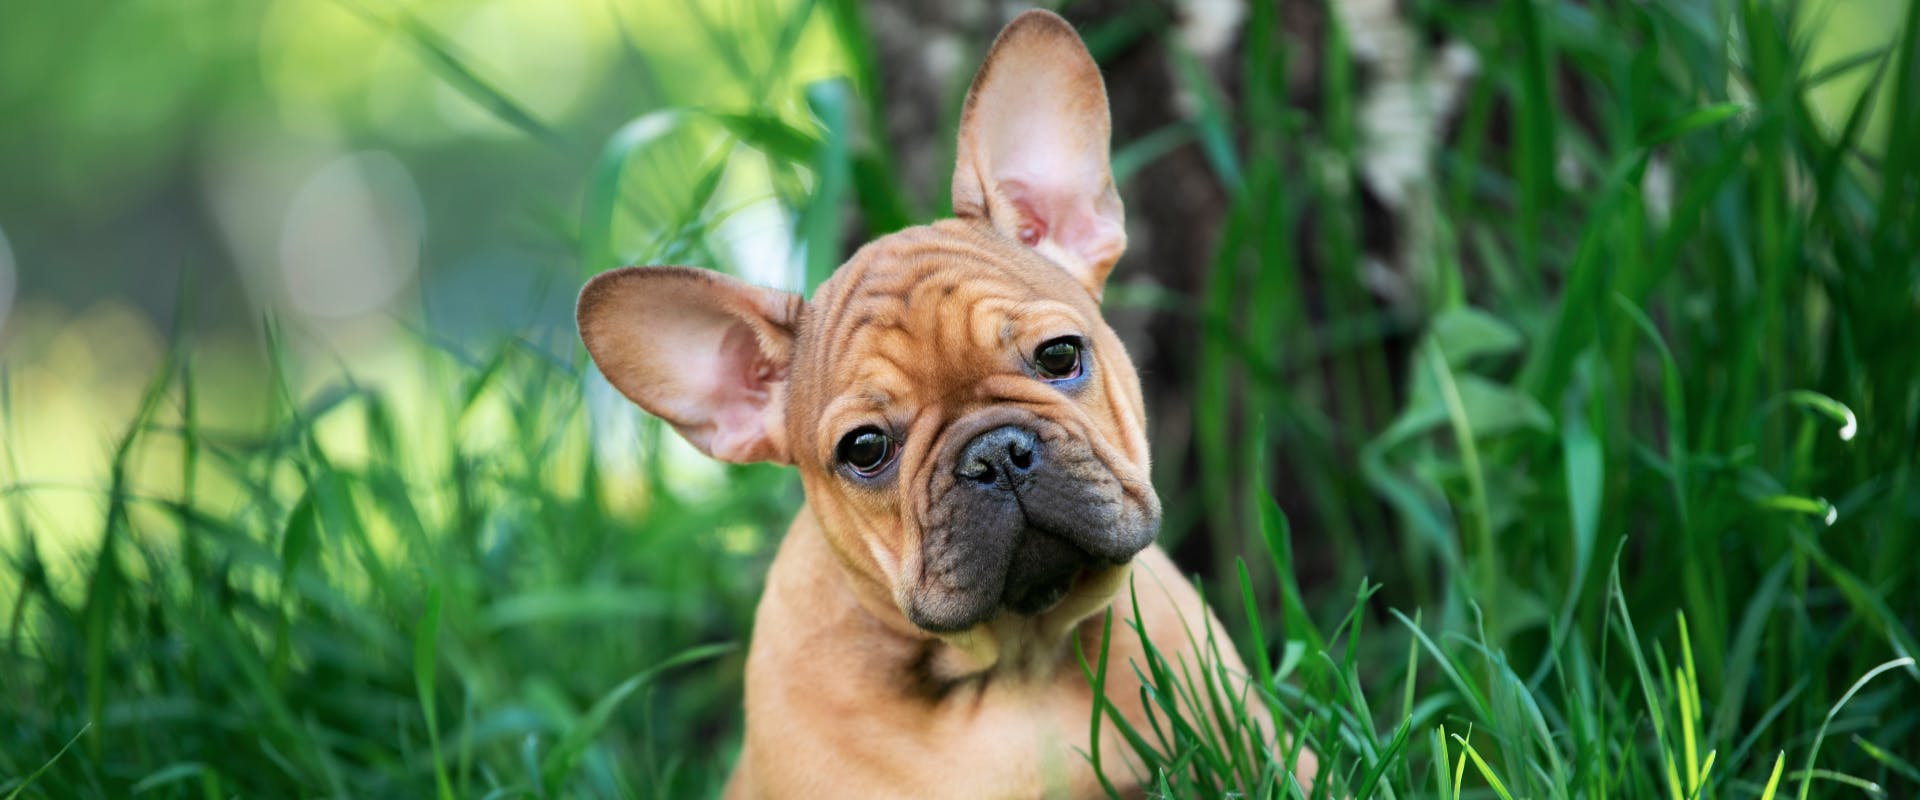 A Frenchie puppy sitting in the grass.